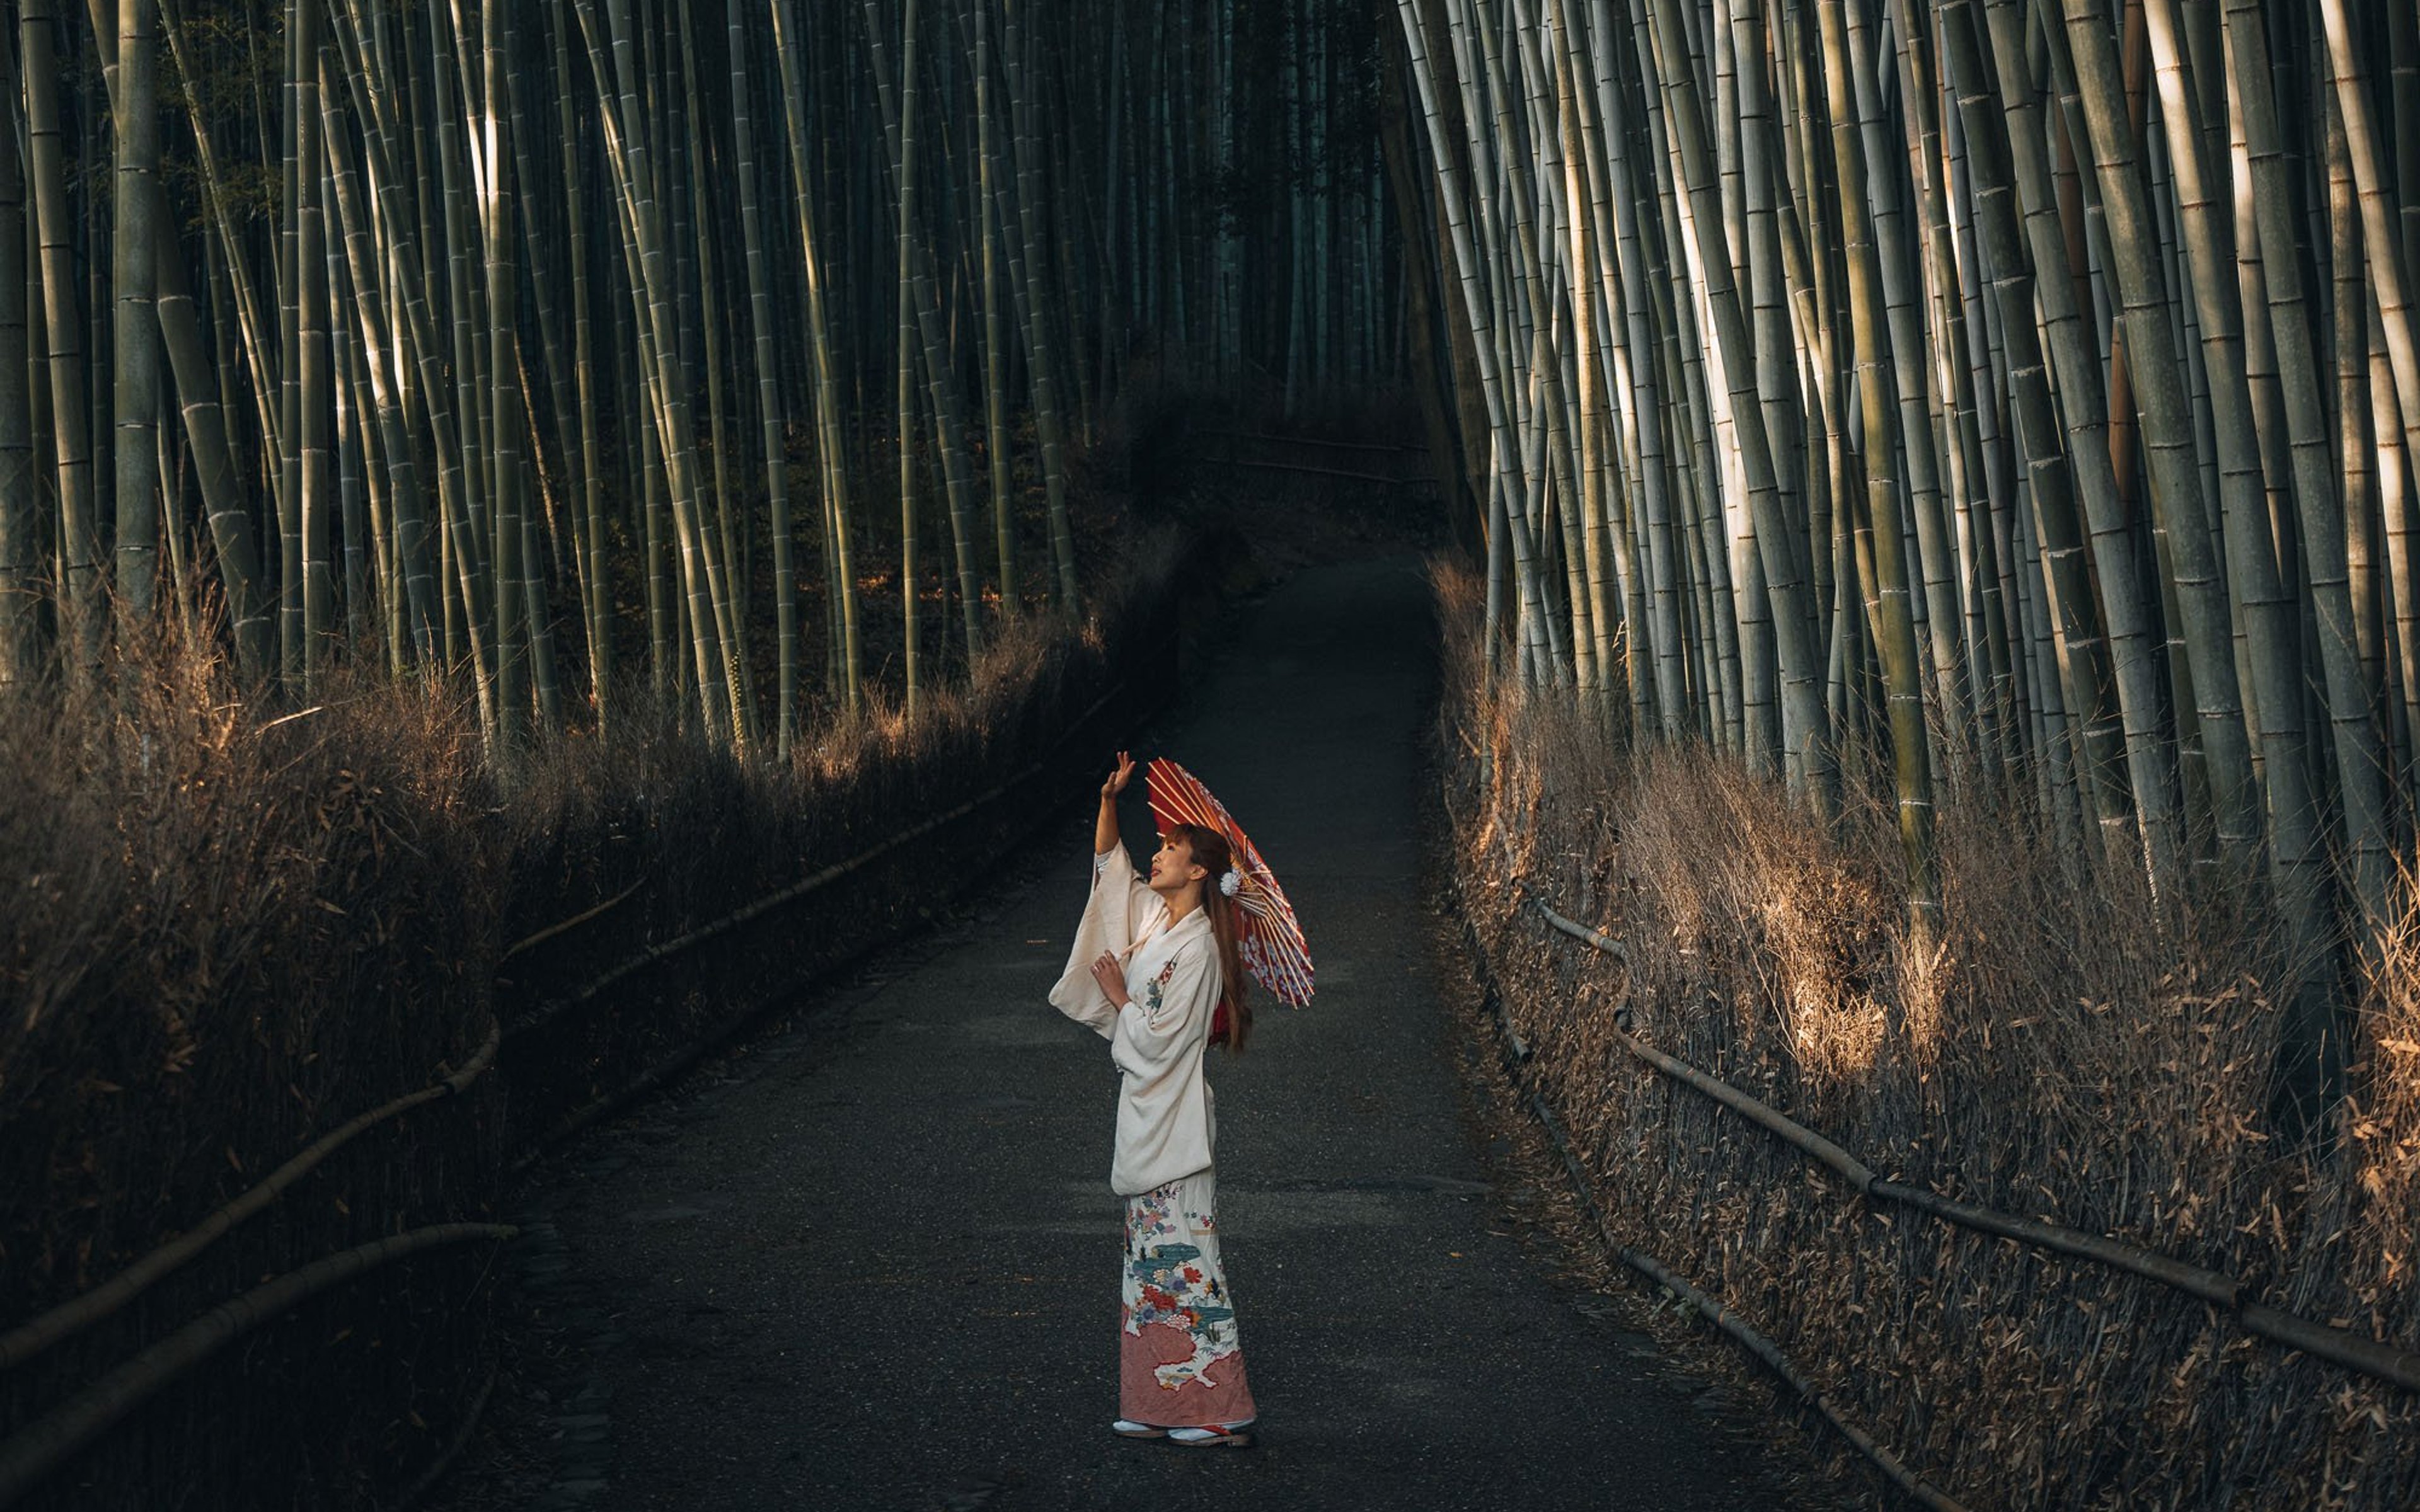 Woman in traditional Japanese dress walking on a path between tall bamboos.